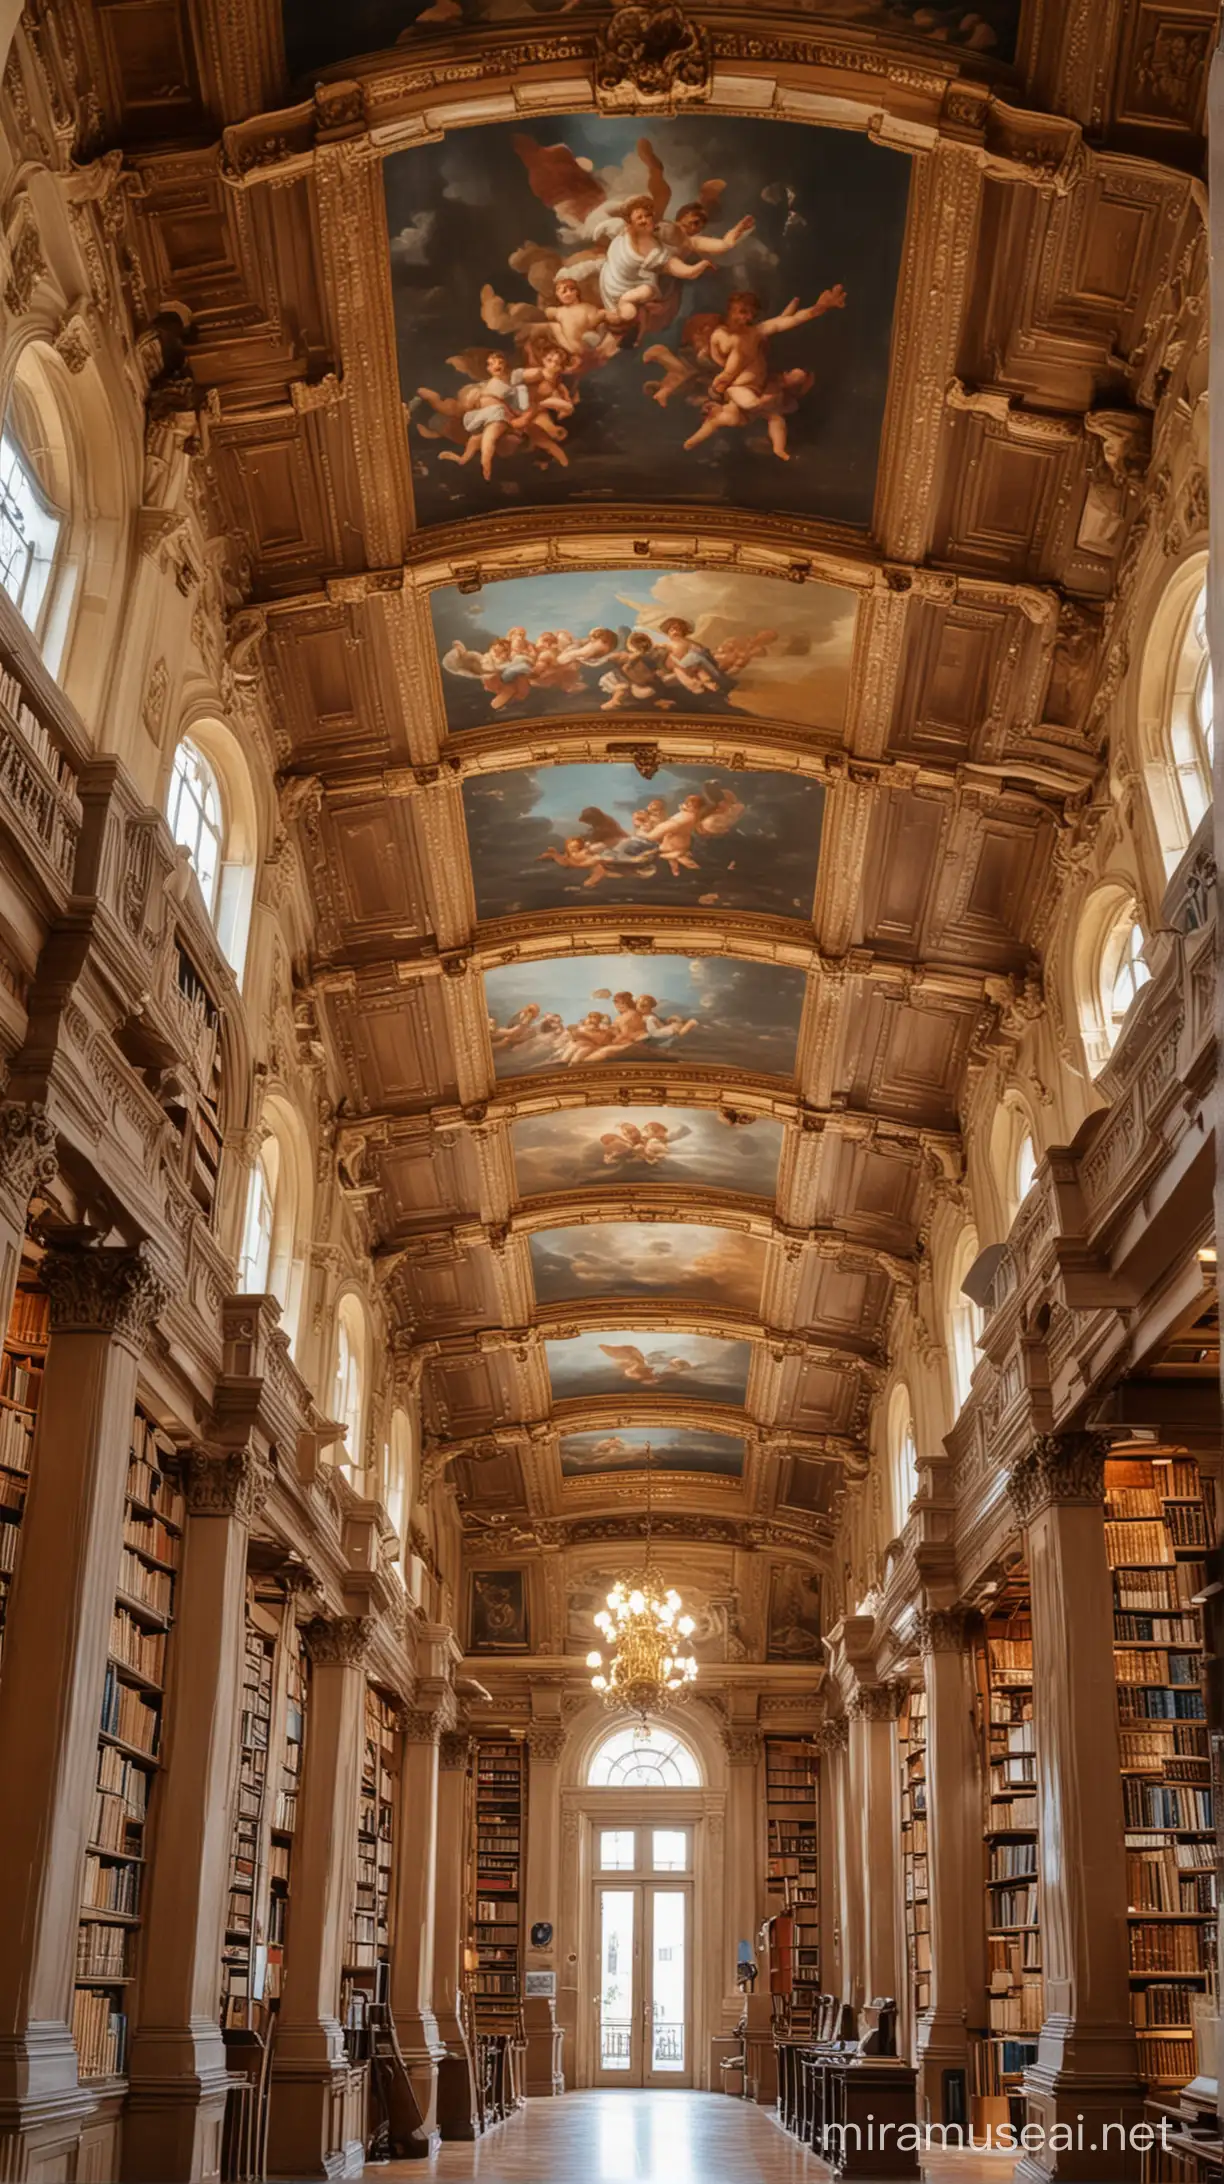 beautiful library, bright, full of books, complex architecture, the ceiling full of paintings with baby angels, classic design